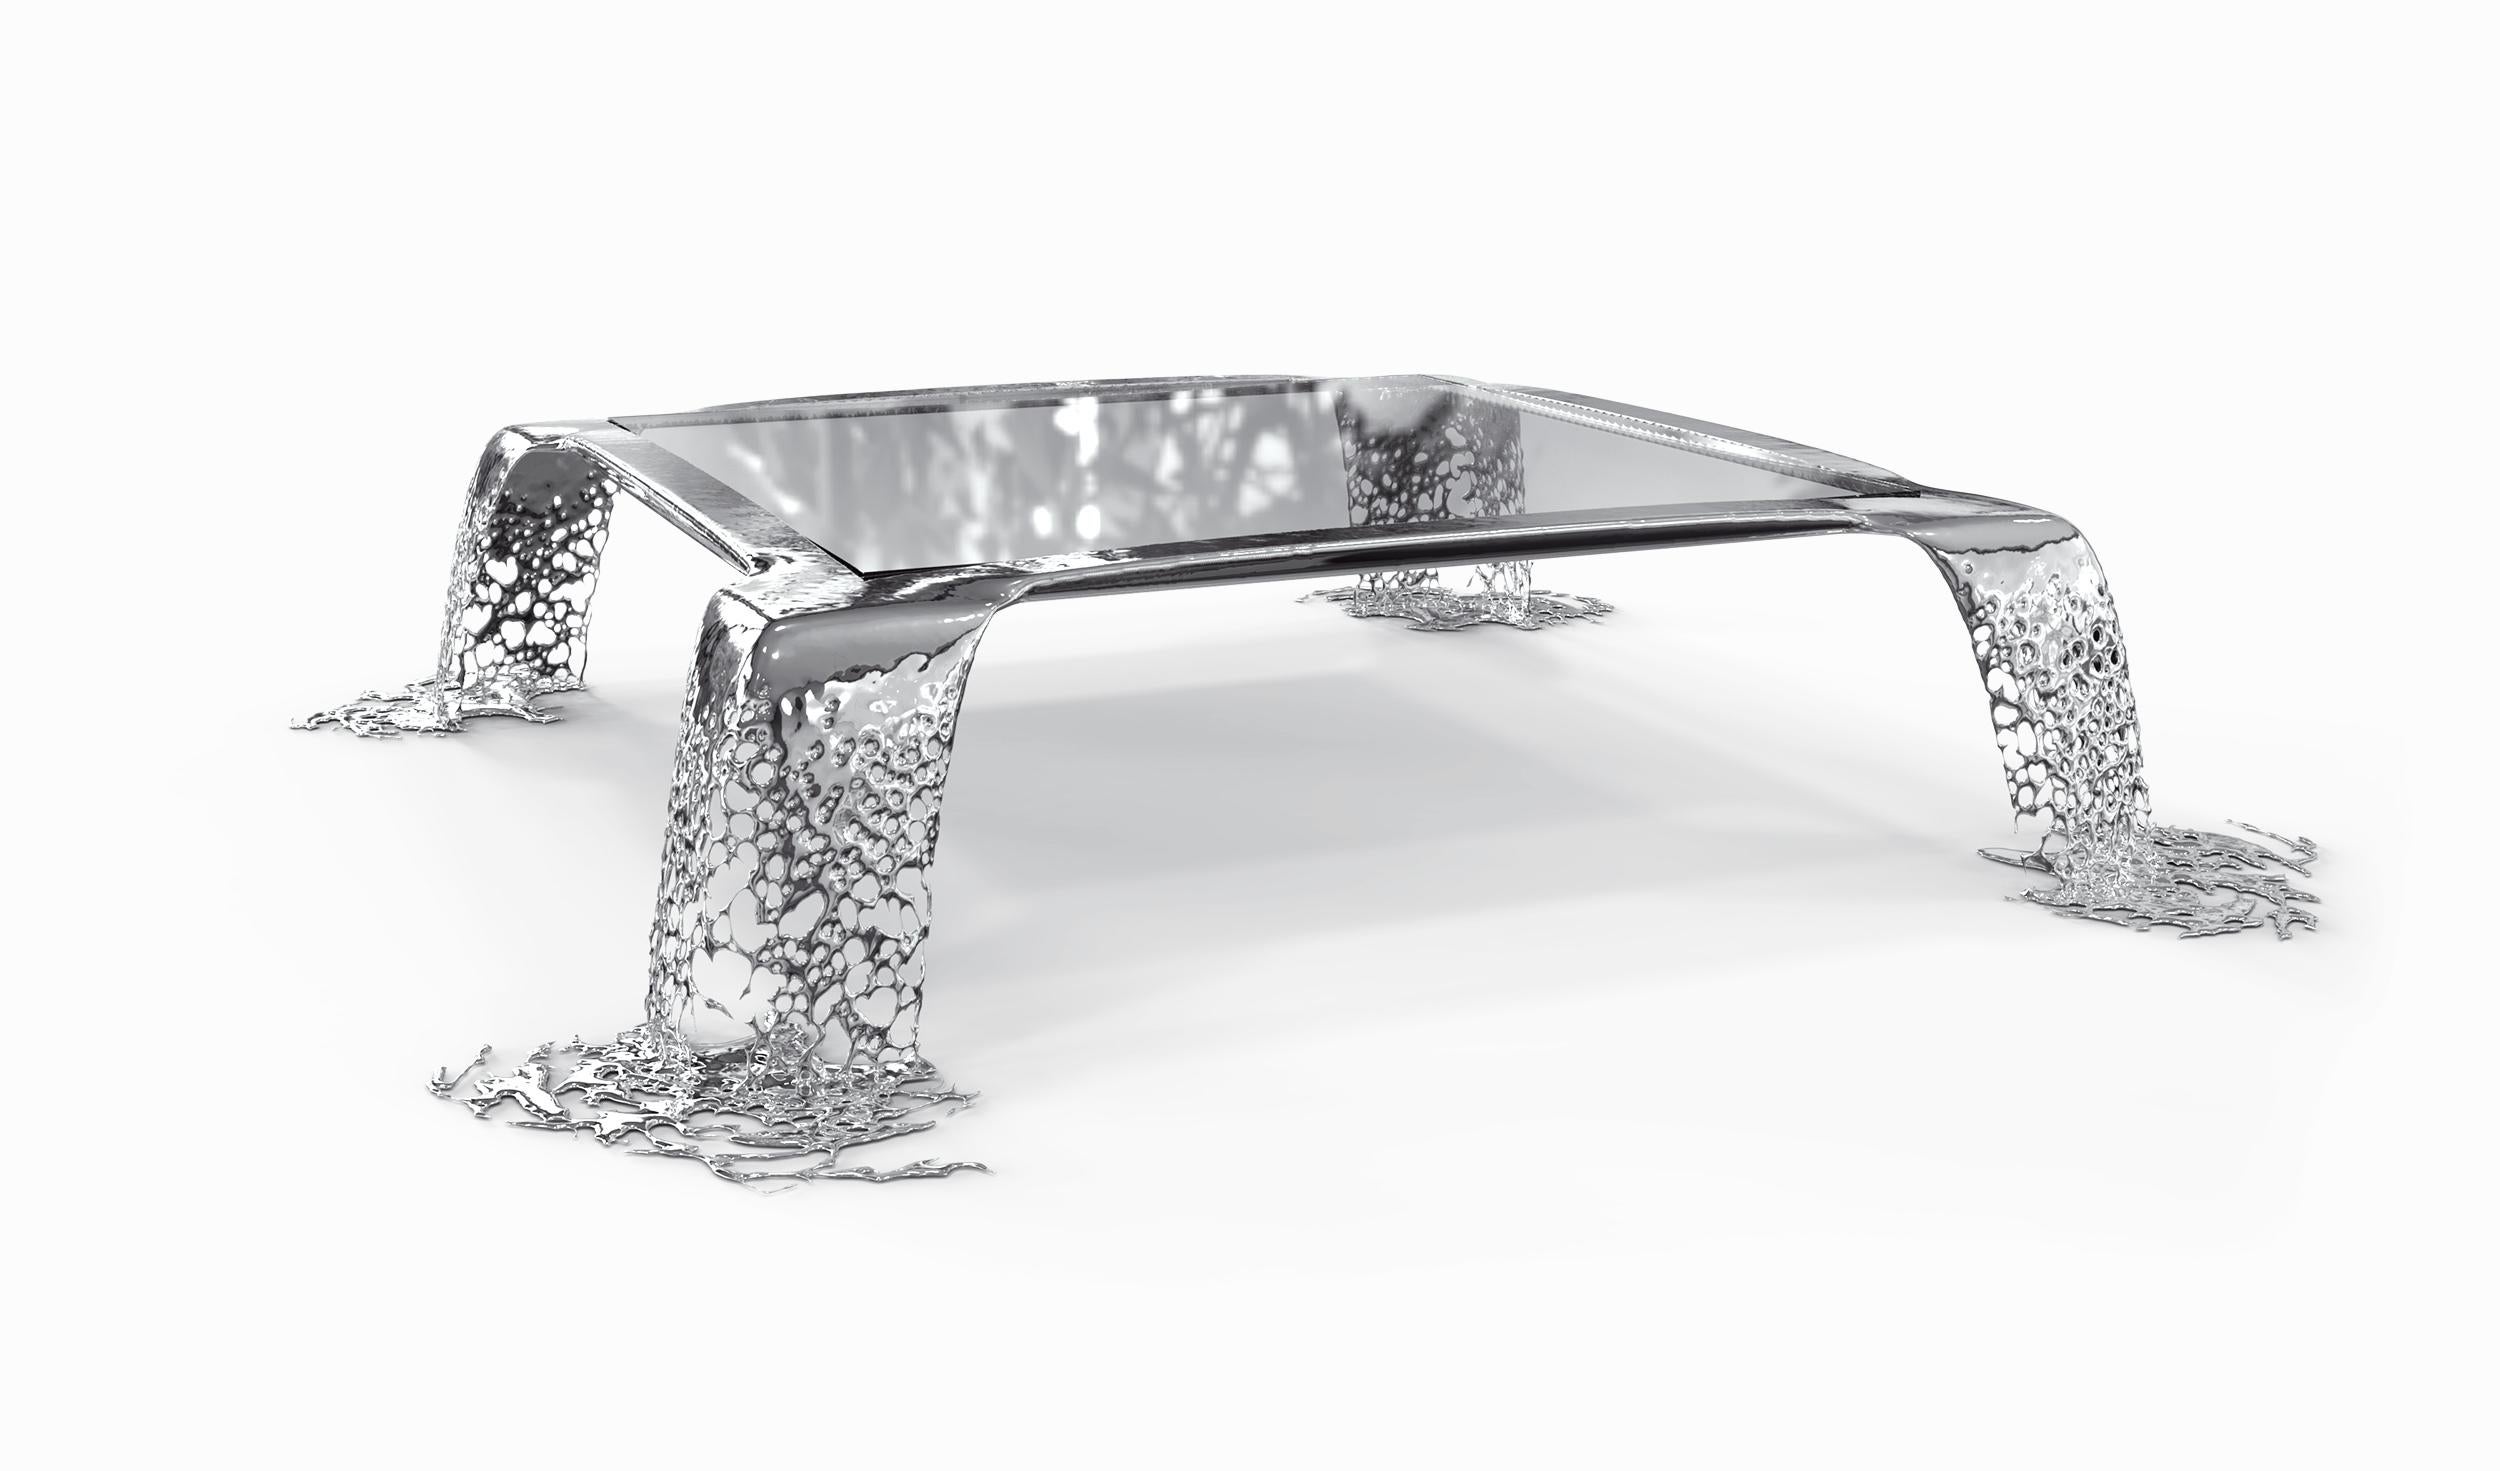 Cast Cascatta Stainless Steel Mirror Polish Square Dining Table For Sale